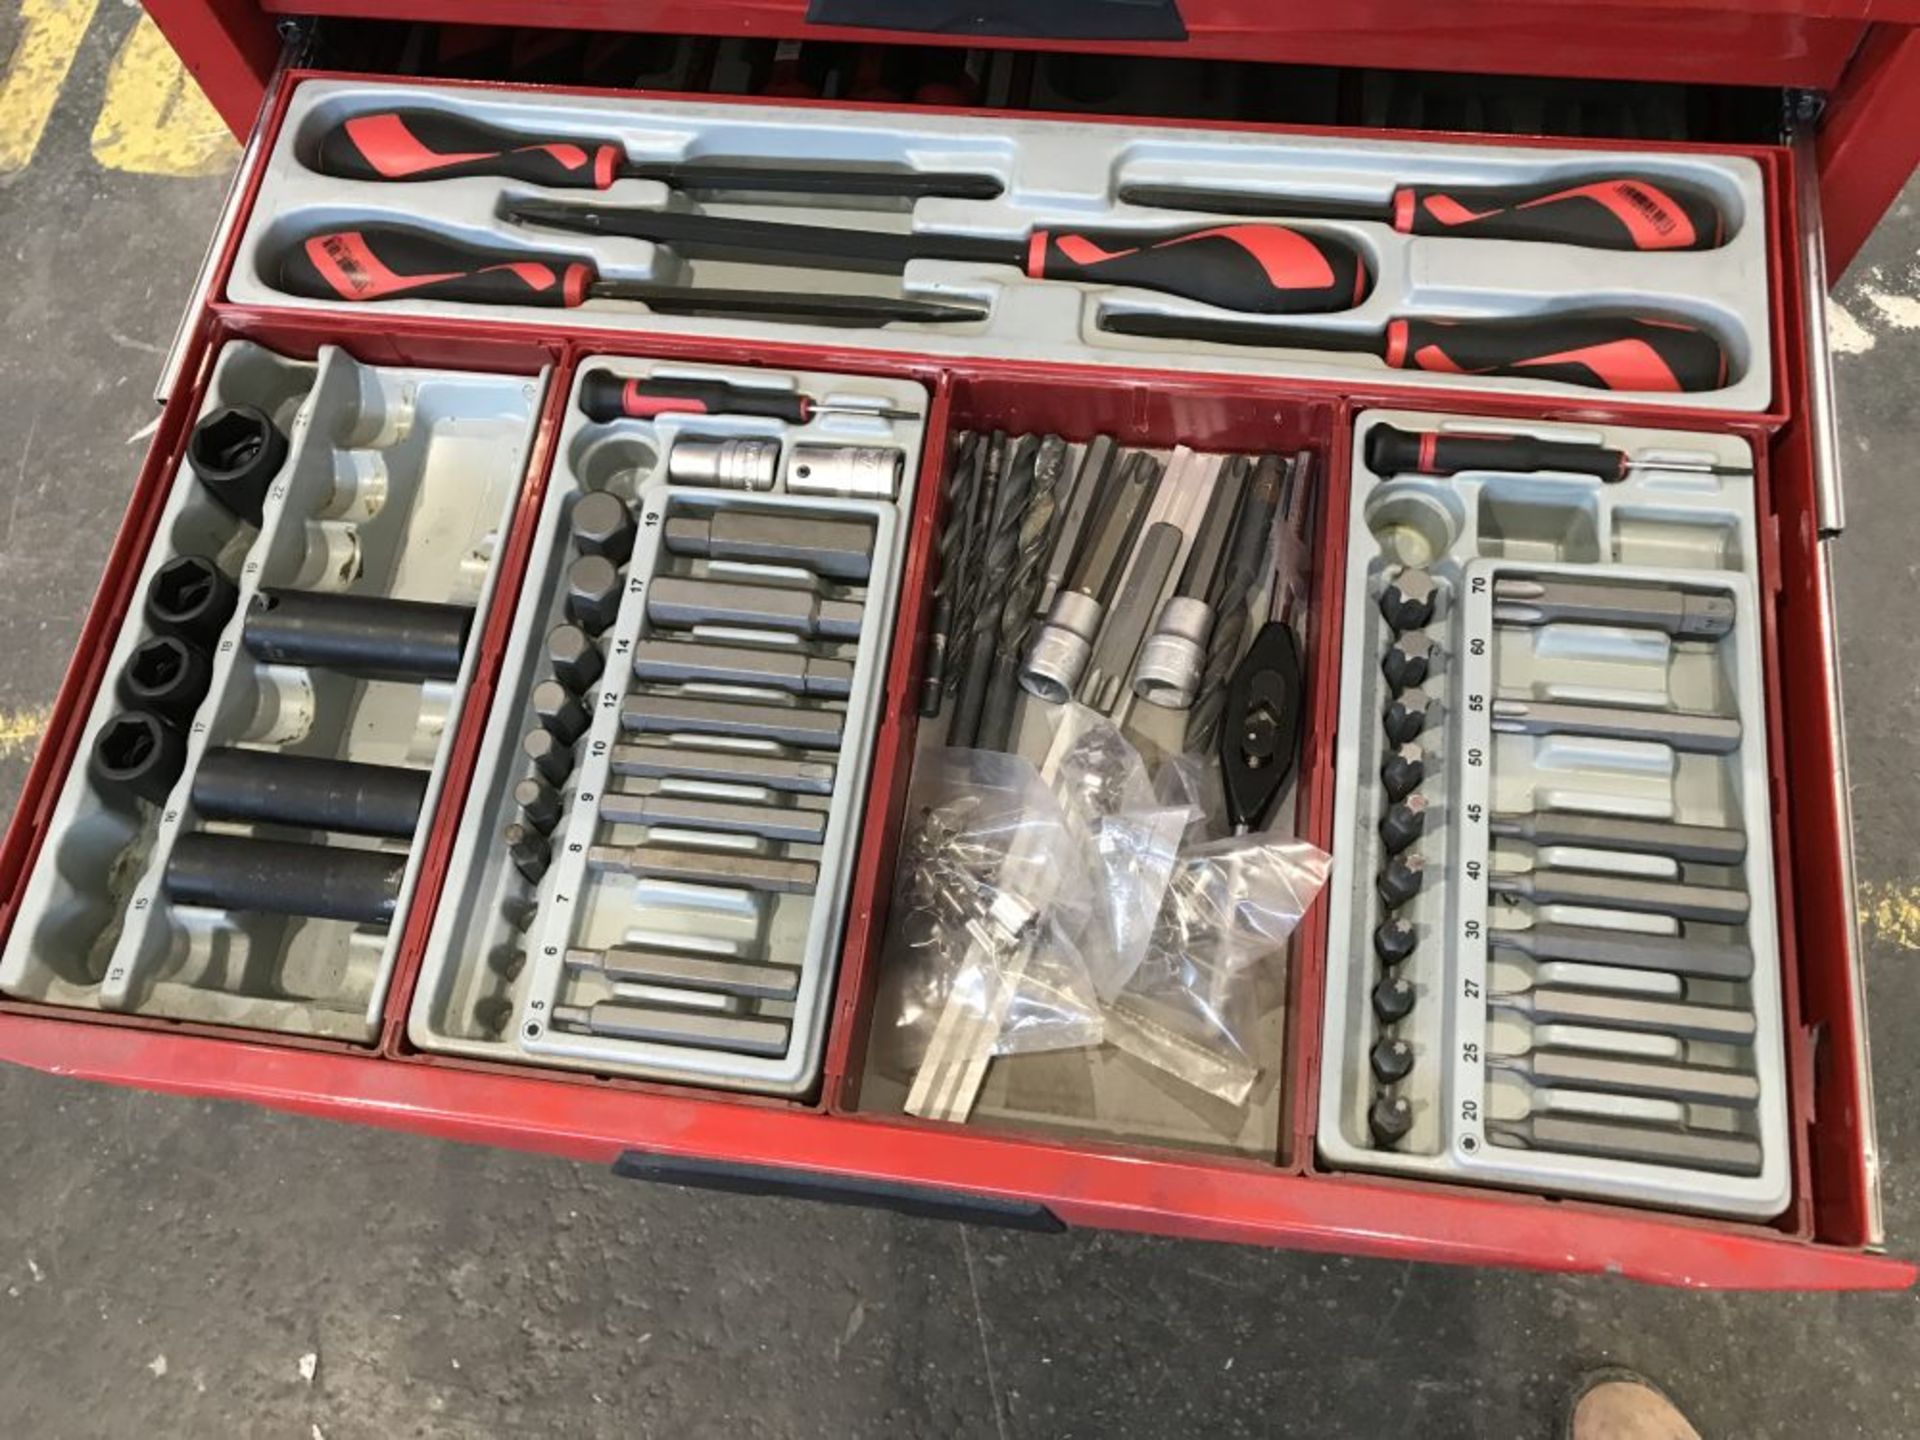 A Teng Tools mobile tool cabinet with additional casters, some tools missing - Image 10 of 17